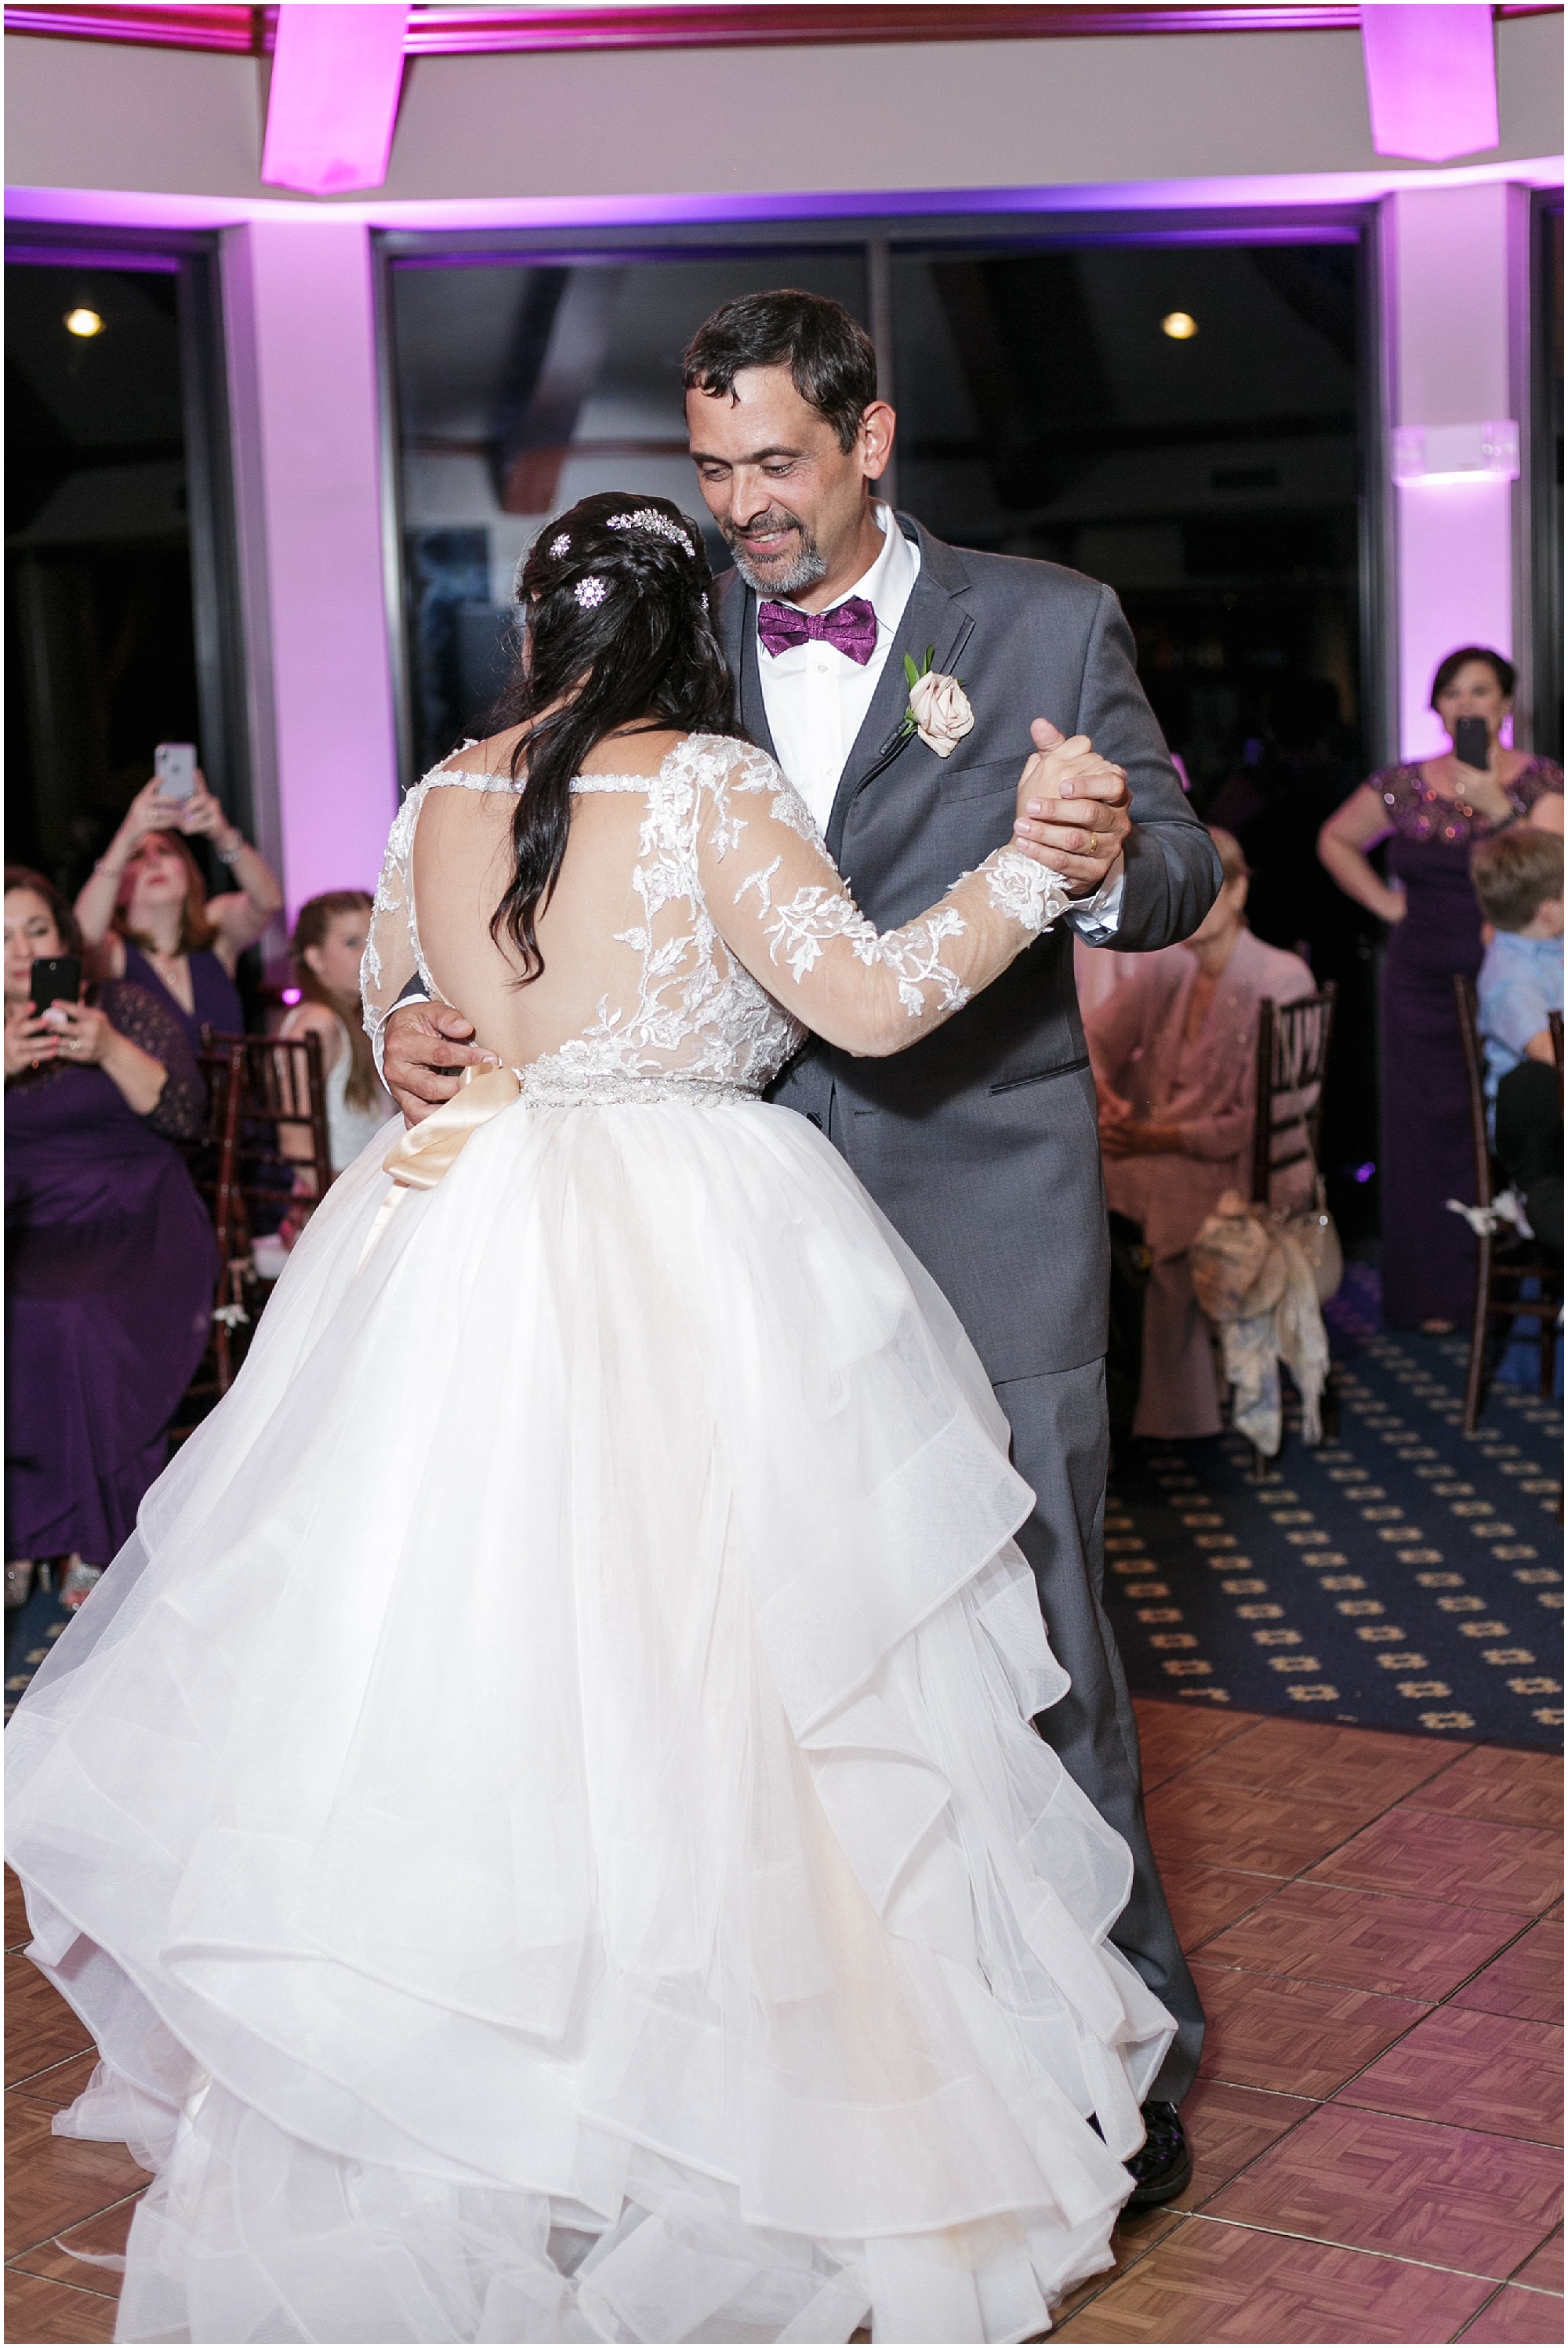 Dad dances with his daughter on her wedding day. 